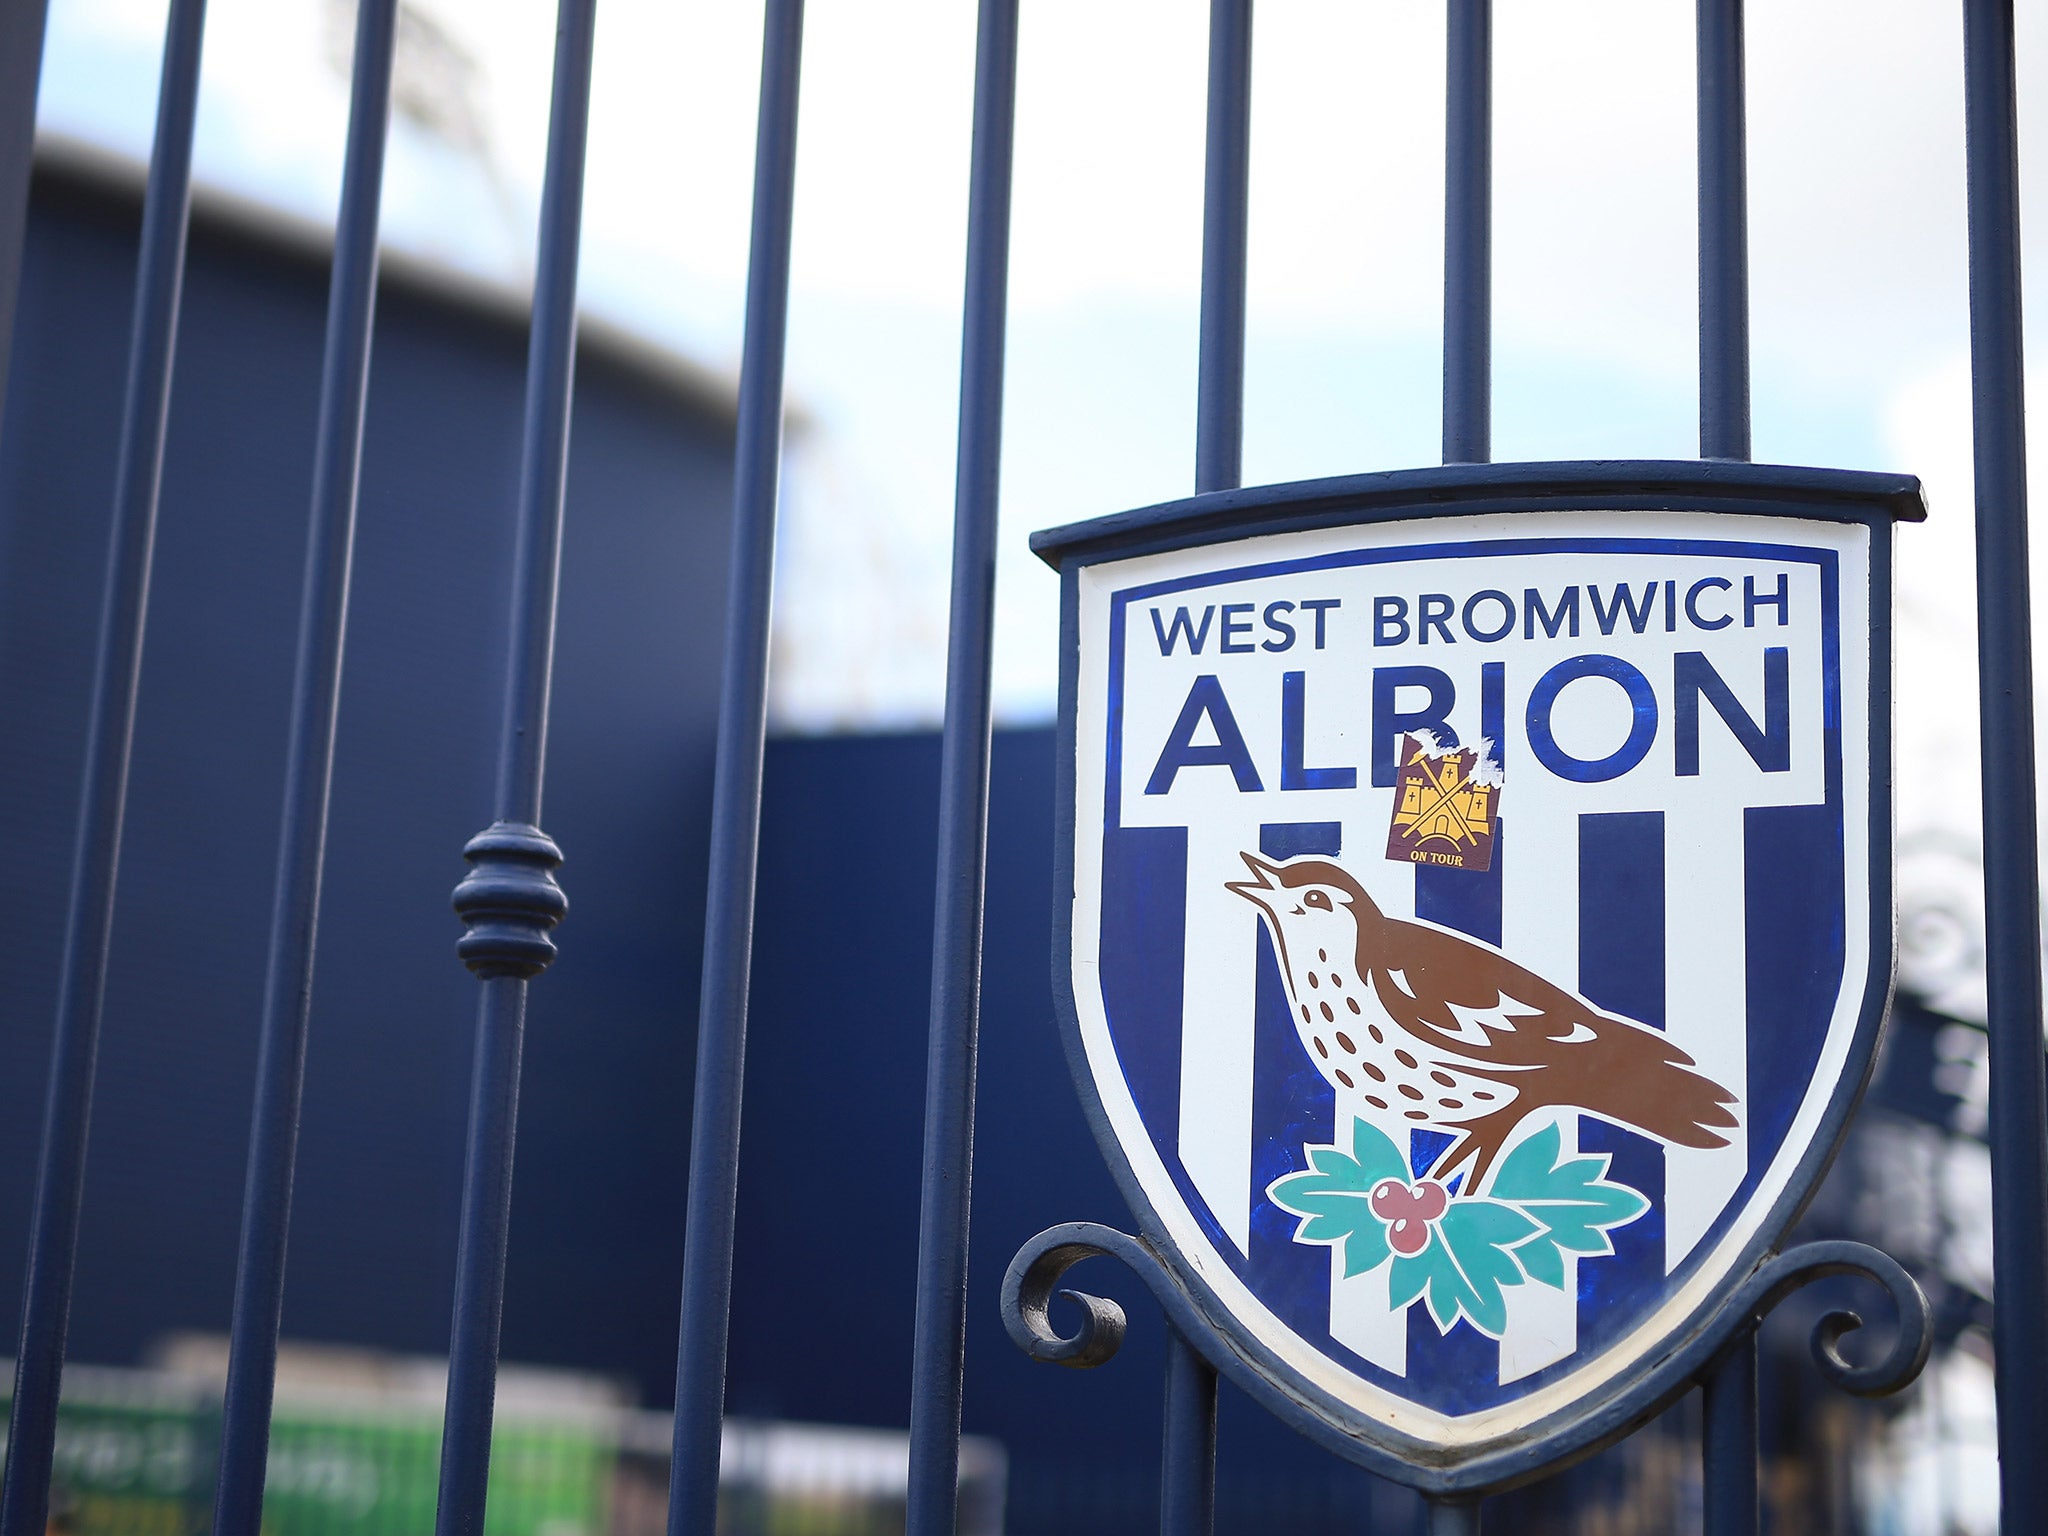 West Brom have agreed a takeover deal with Chinese investment group Yunyi Guokai Sports Development